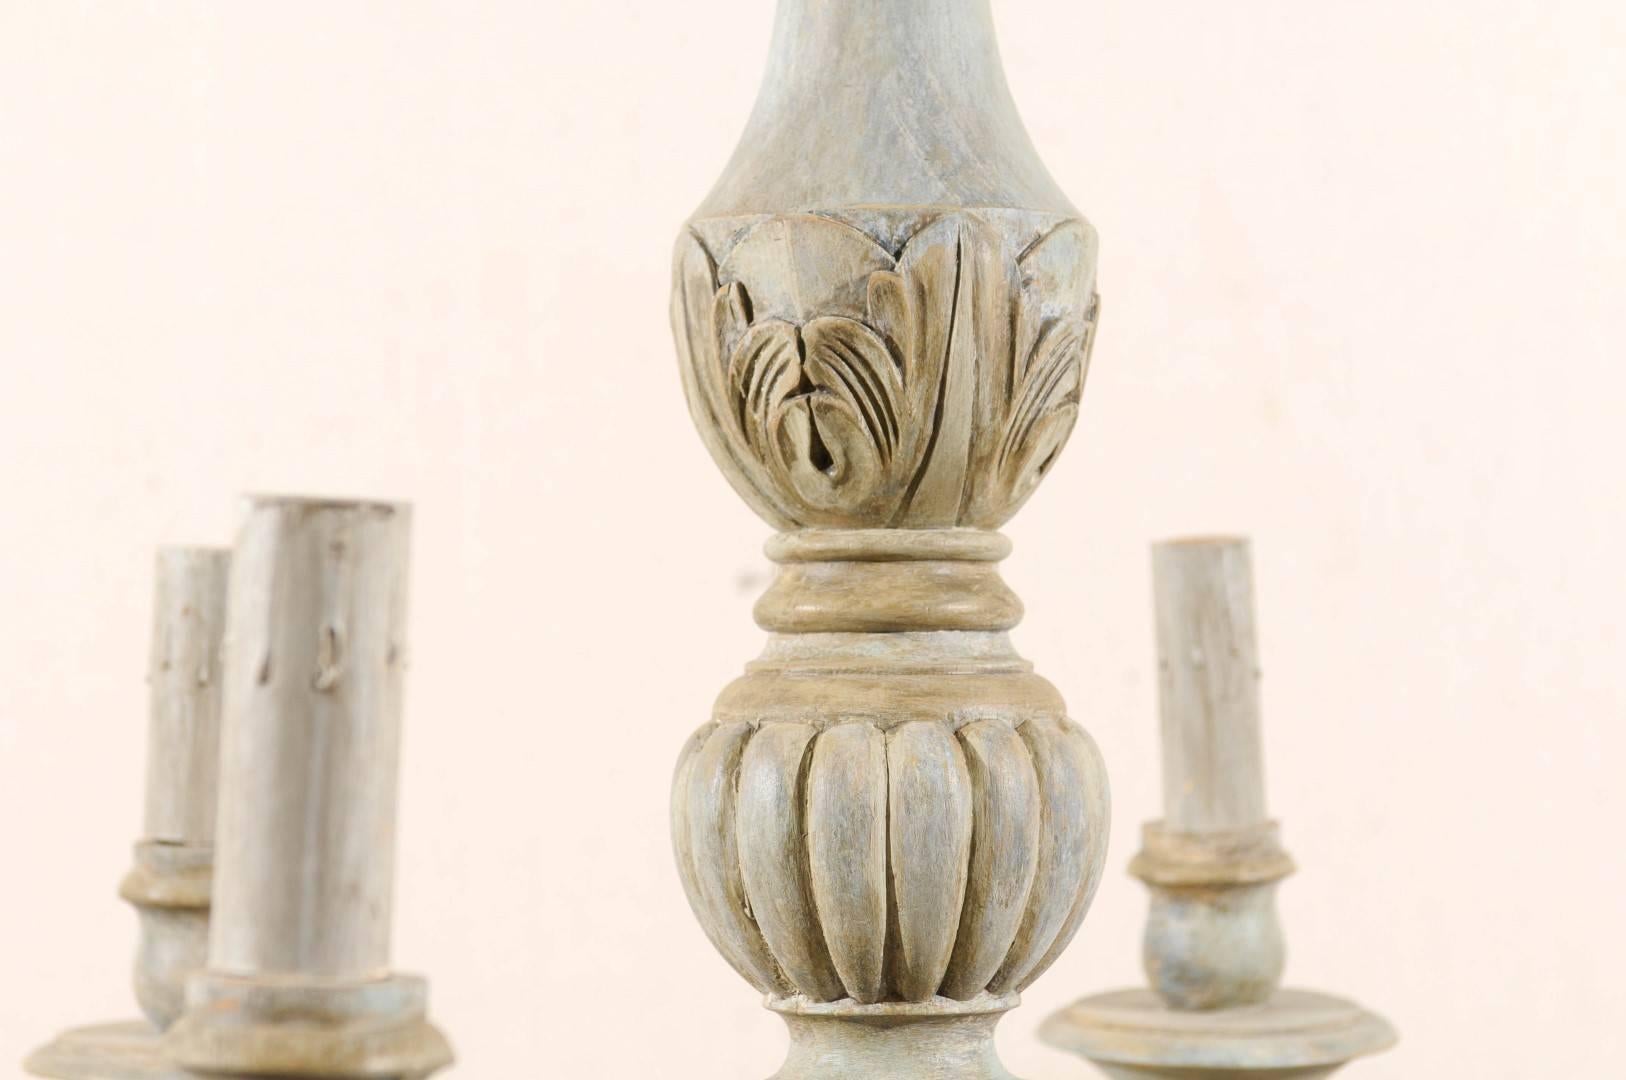 20th Century French Vintage Painted Wood Six-Light Chandelier with Acanthus Leaf Motifs